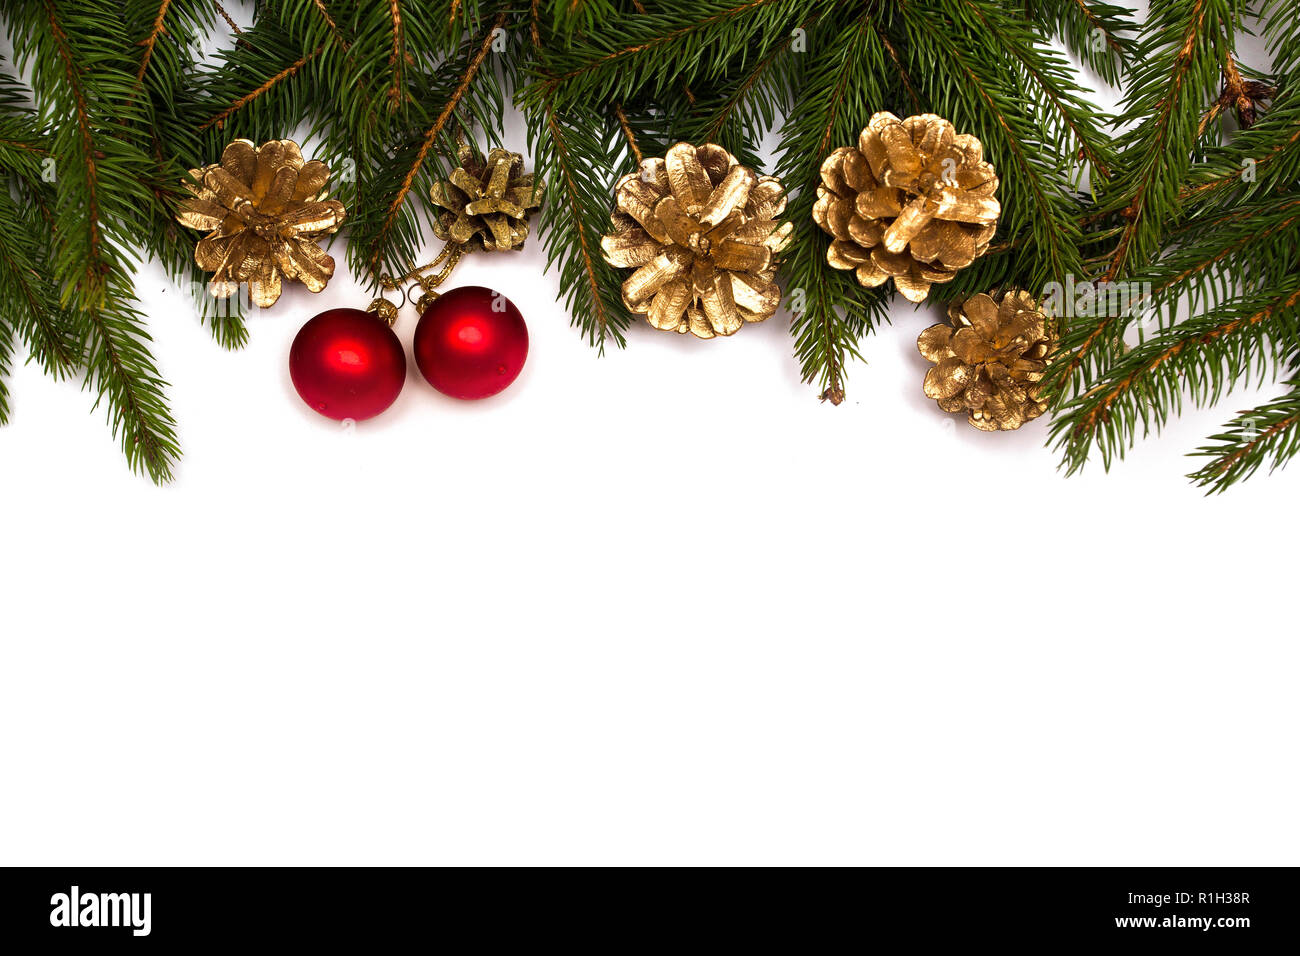 Christmas tree branches with red baubles and gold cones on white background. Stock Photo